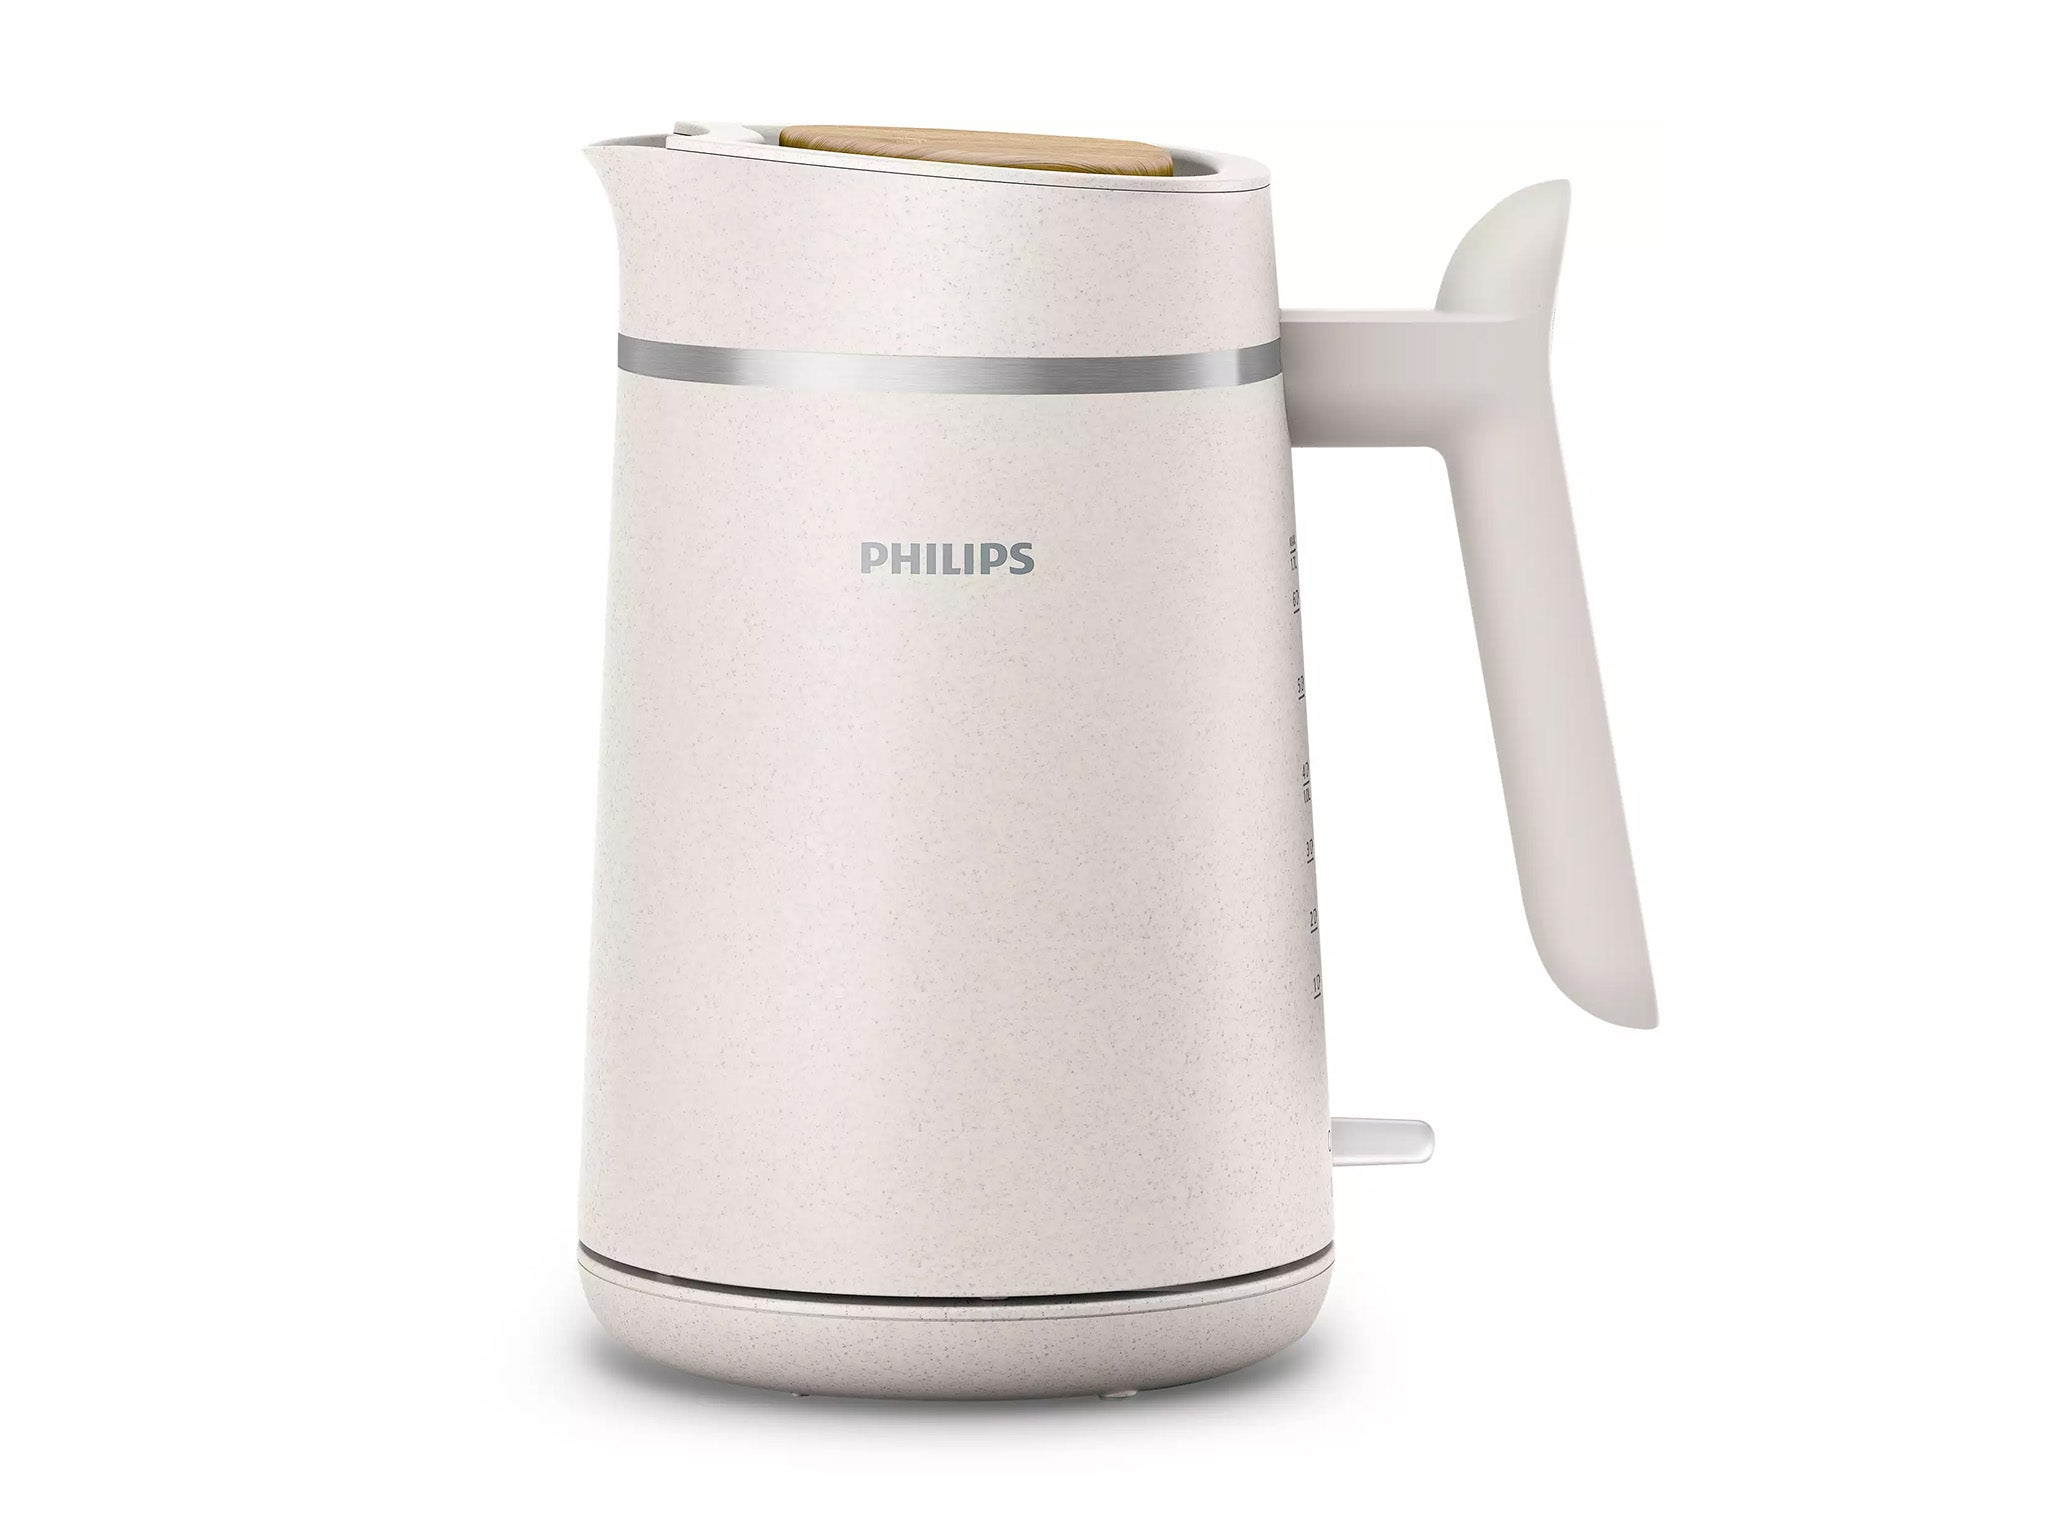 Philips eco conscious edition5000 series kettle.jpg